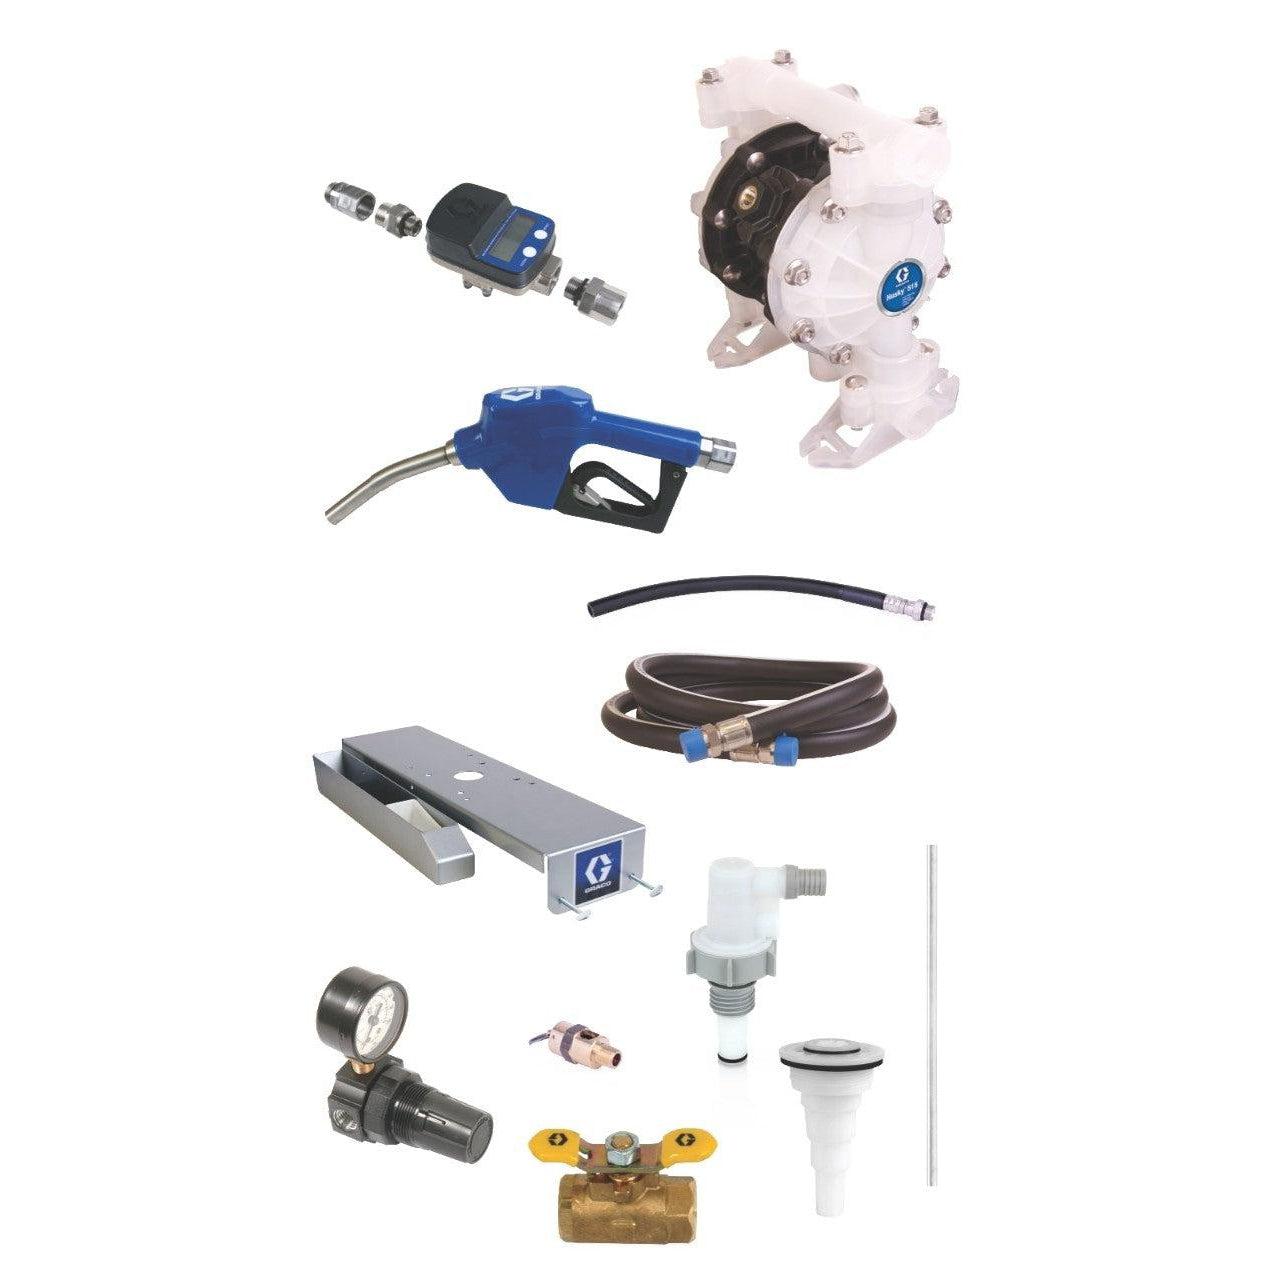 SD¬™ Blue Pump Drum Package - 2 ft (0.61 m) Suction Hose Length - Automatic Nozzle - 3/4 in. BSPP Fittings